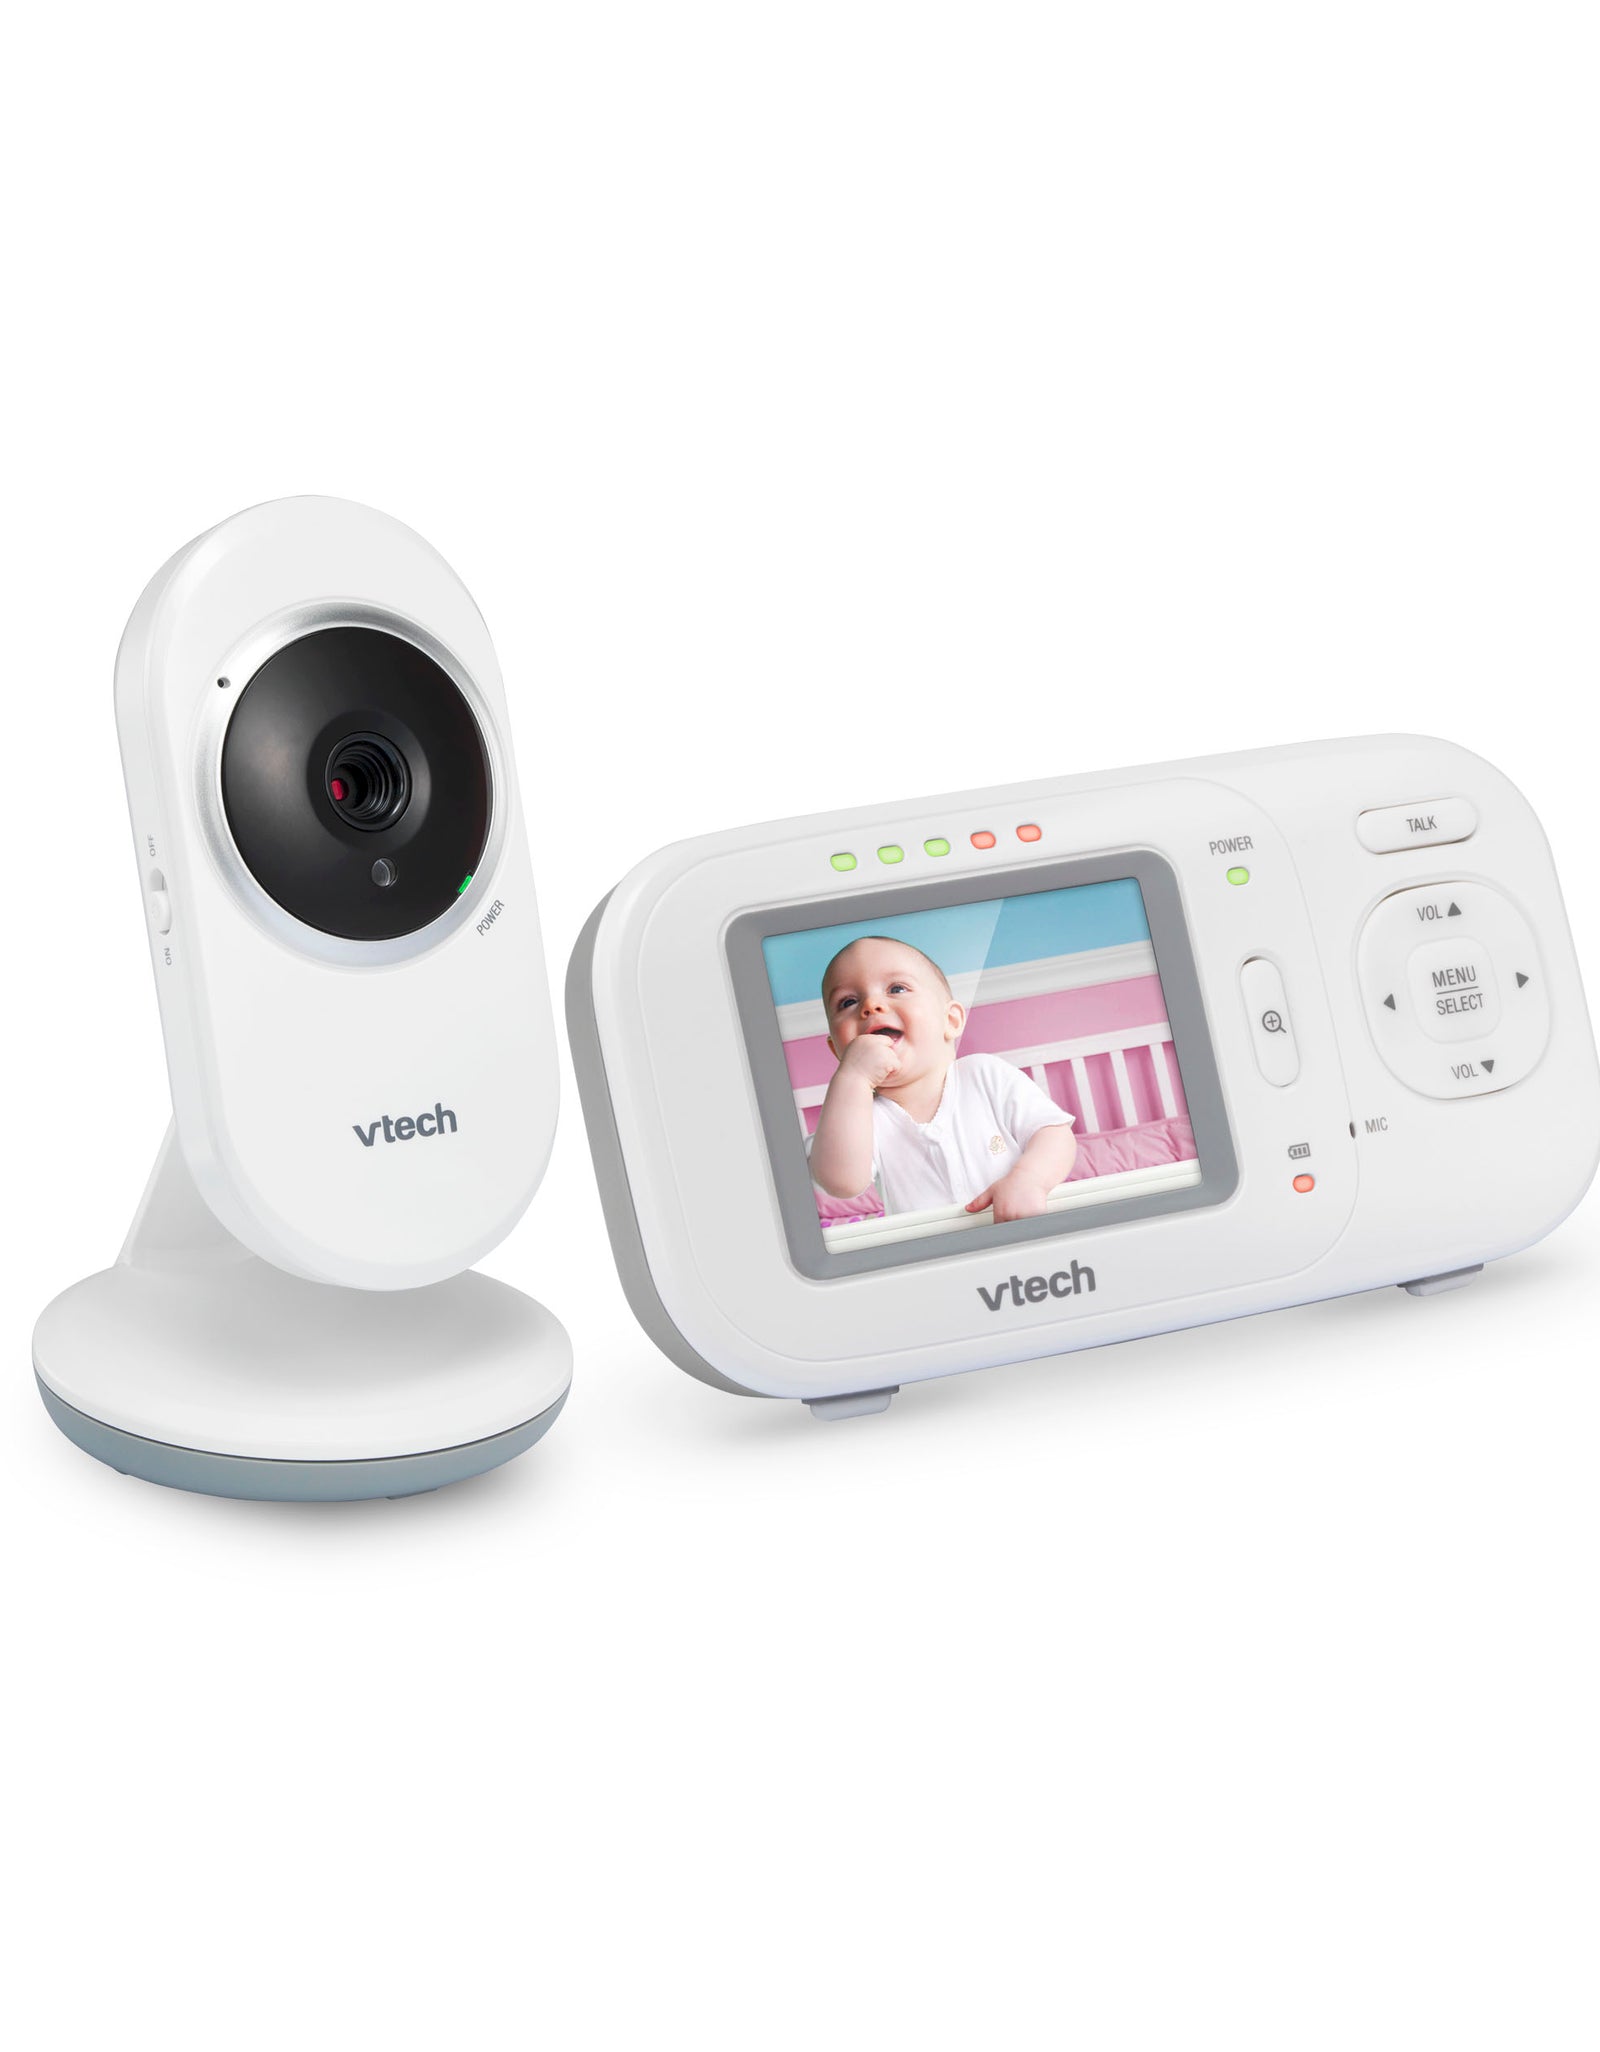 VTech 2.4" Digital Video Baby Monitor with Full-Color and Automatic Night Vision